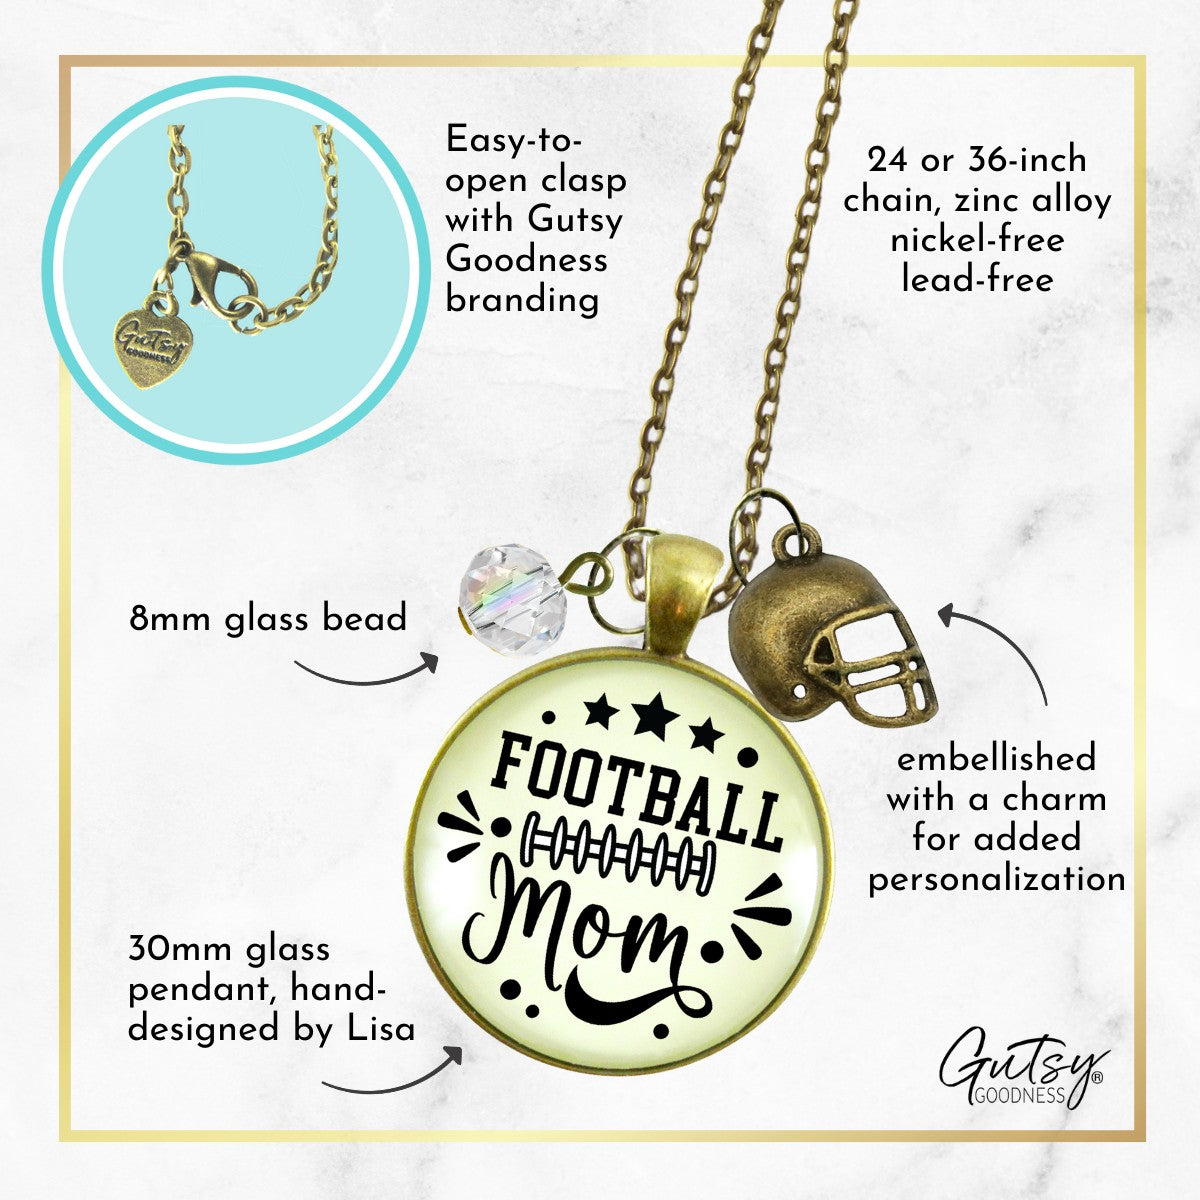 Football charm pendant in silver pewter on an 18